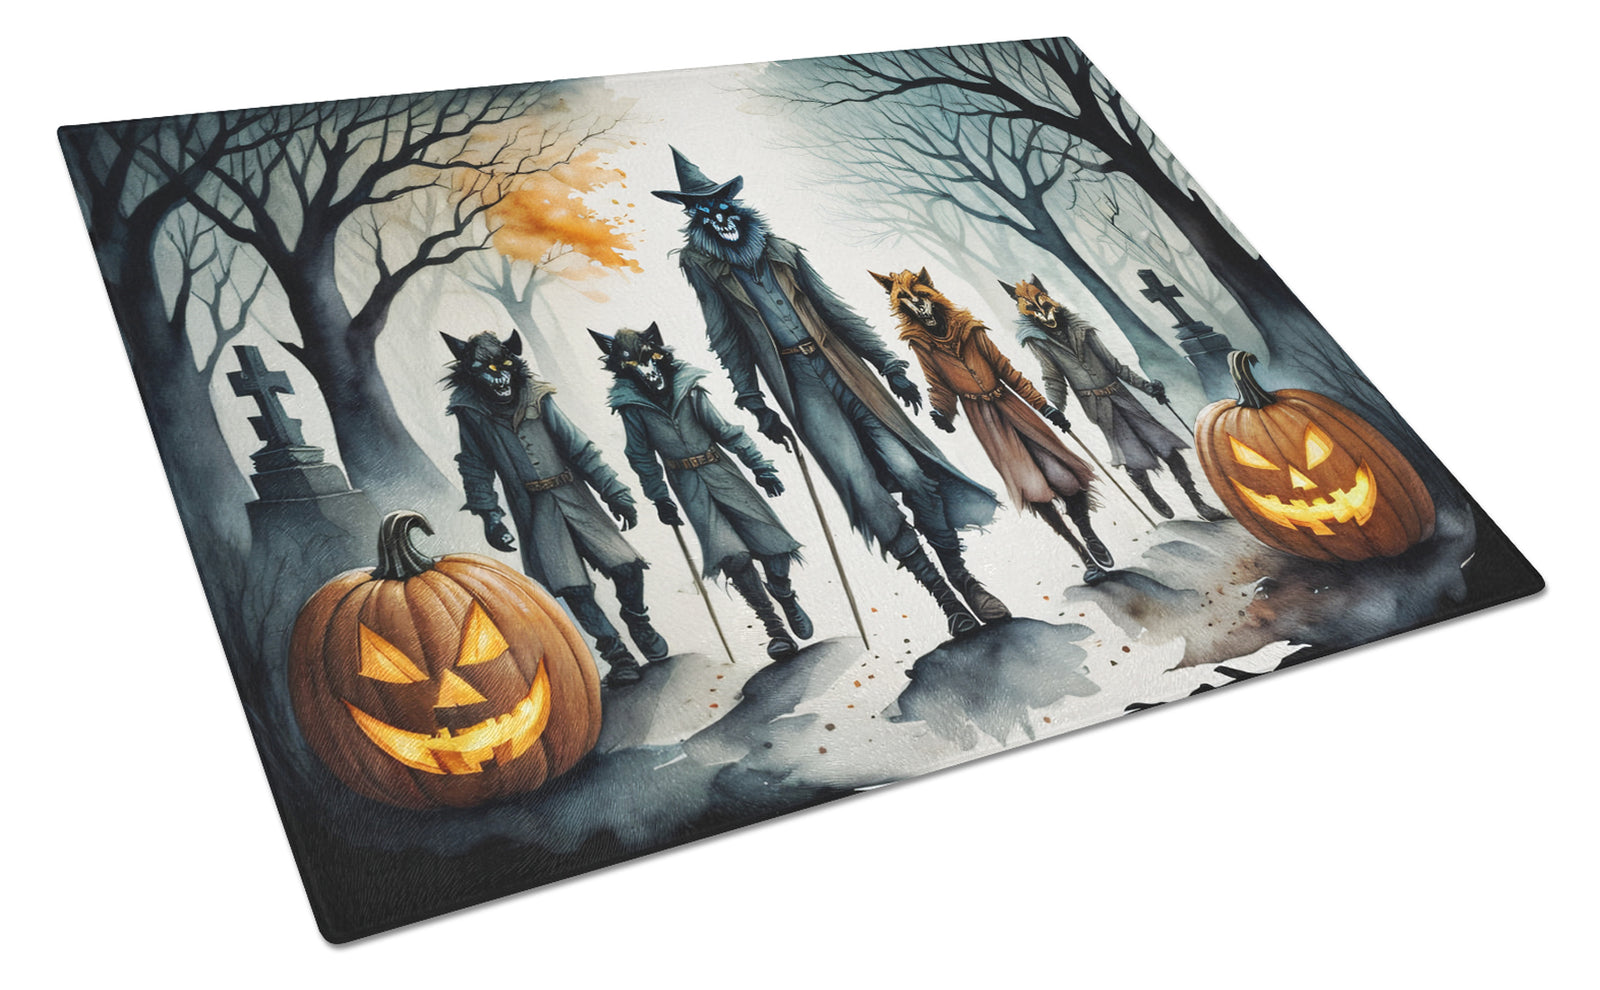 Buy this Werewolves Spooky Halloween Glass Cutting Board Large